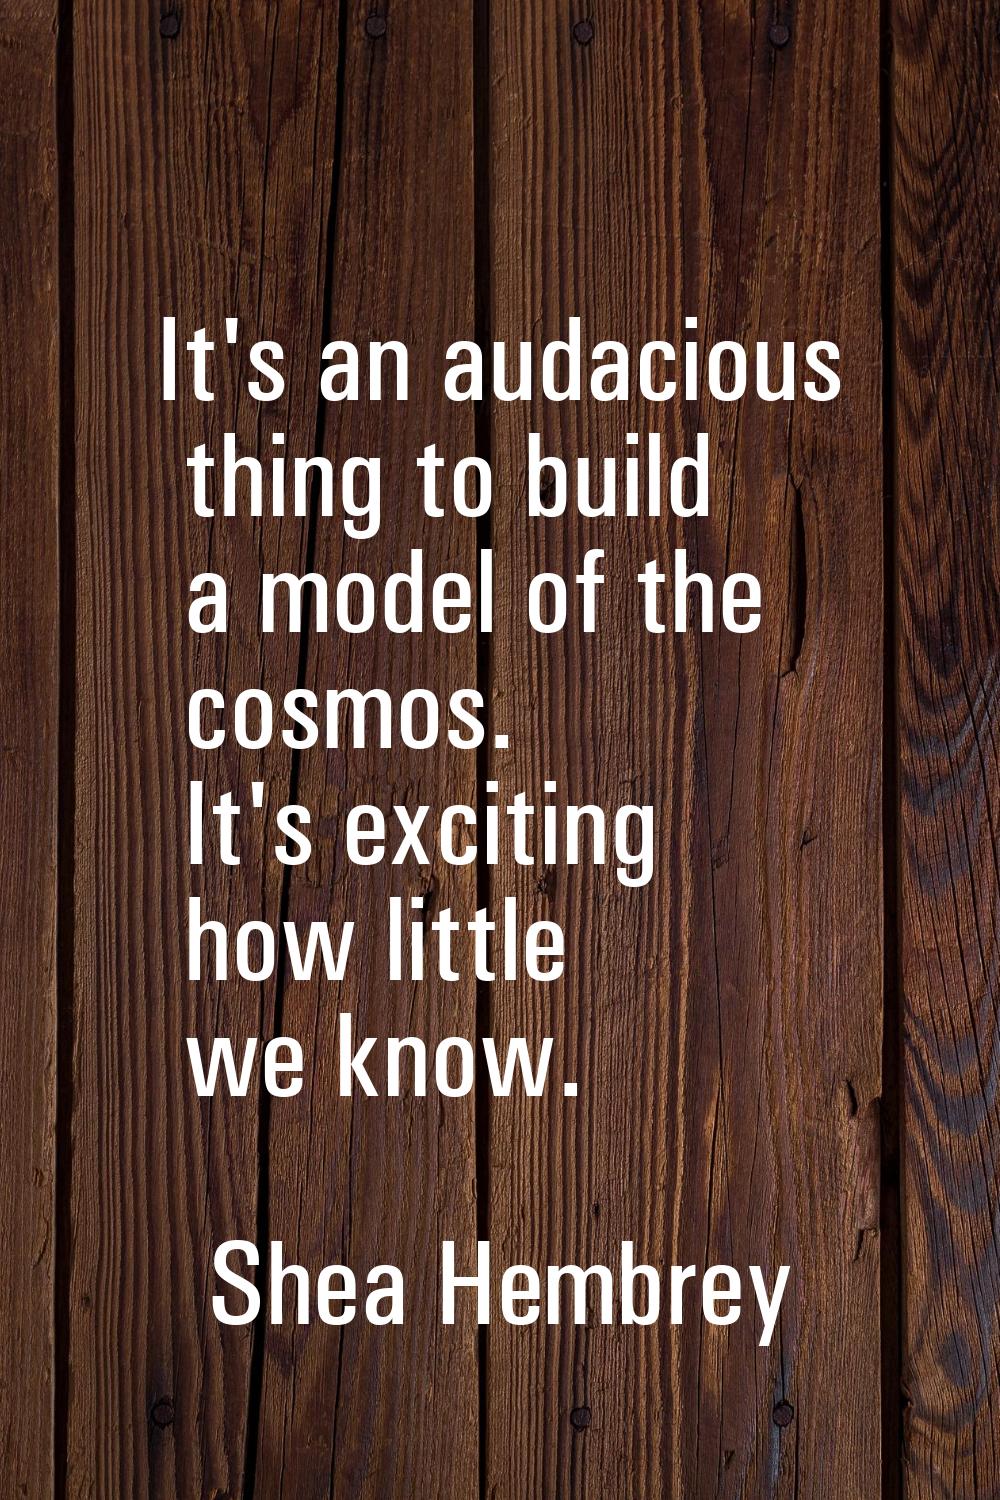 It's an audacious thing to build a model of the cosmos. It's exciting how little we know.